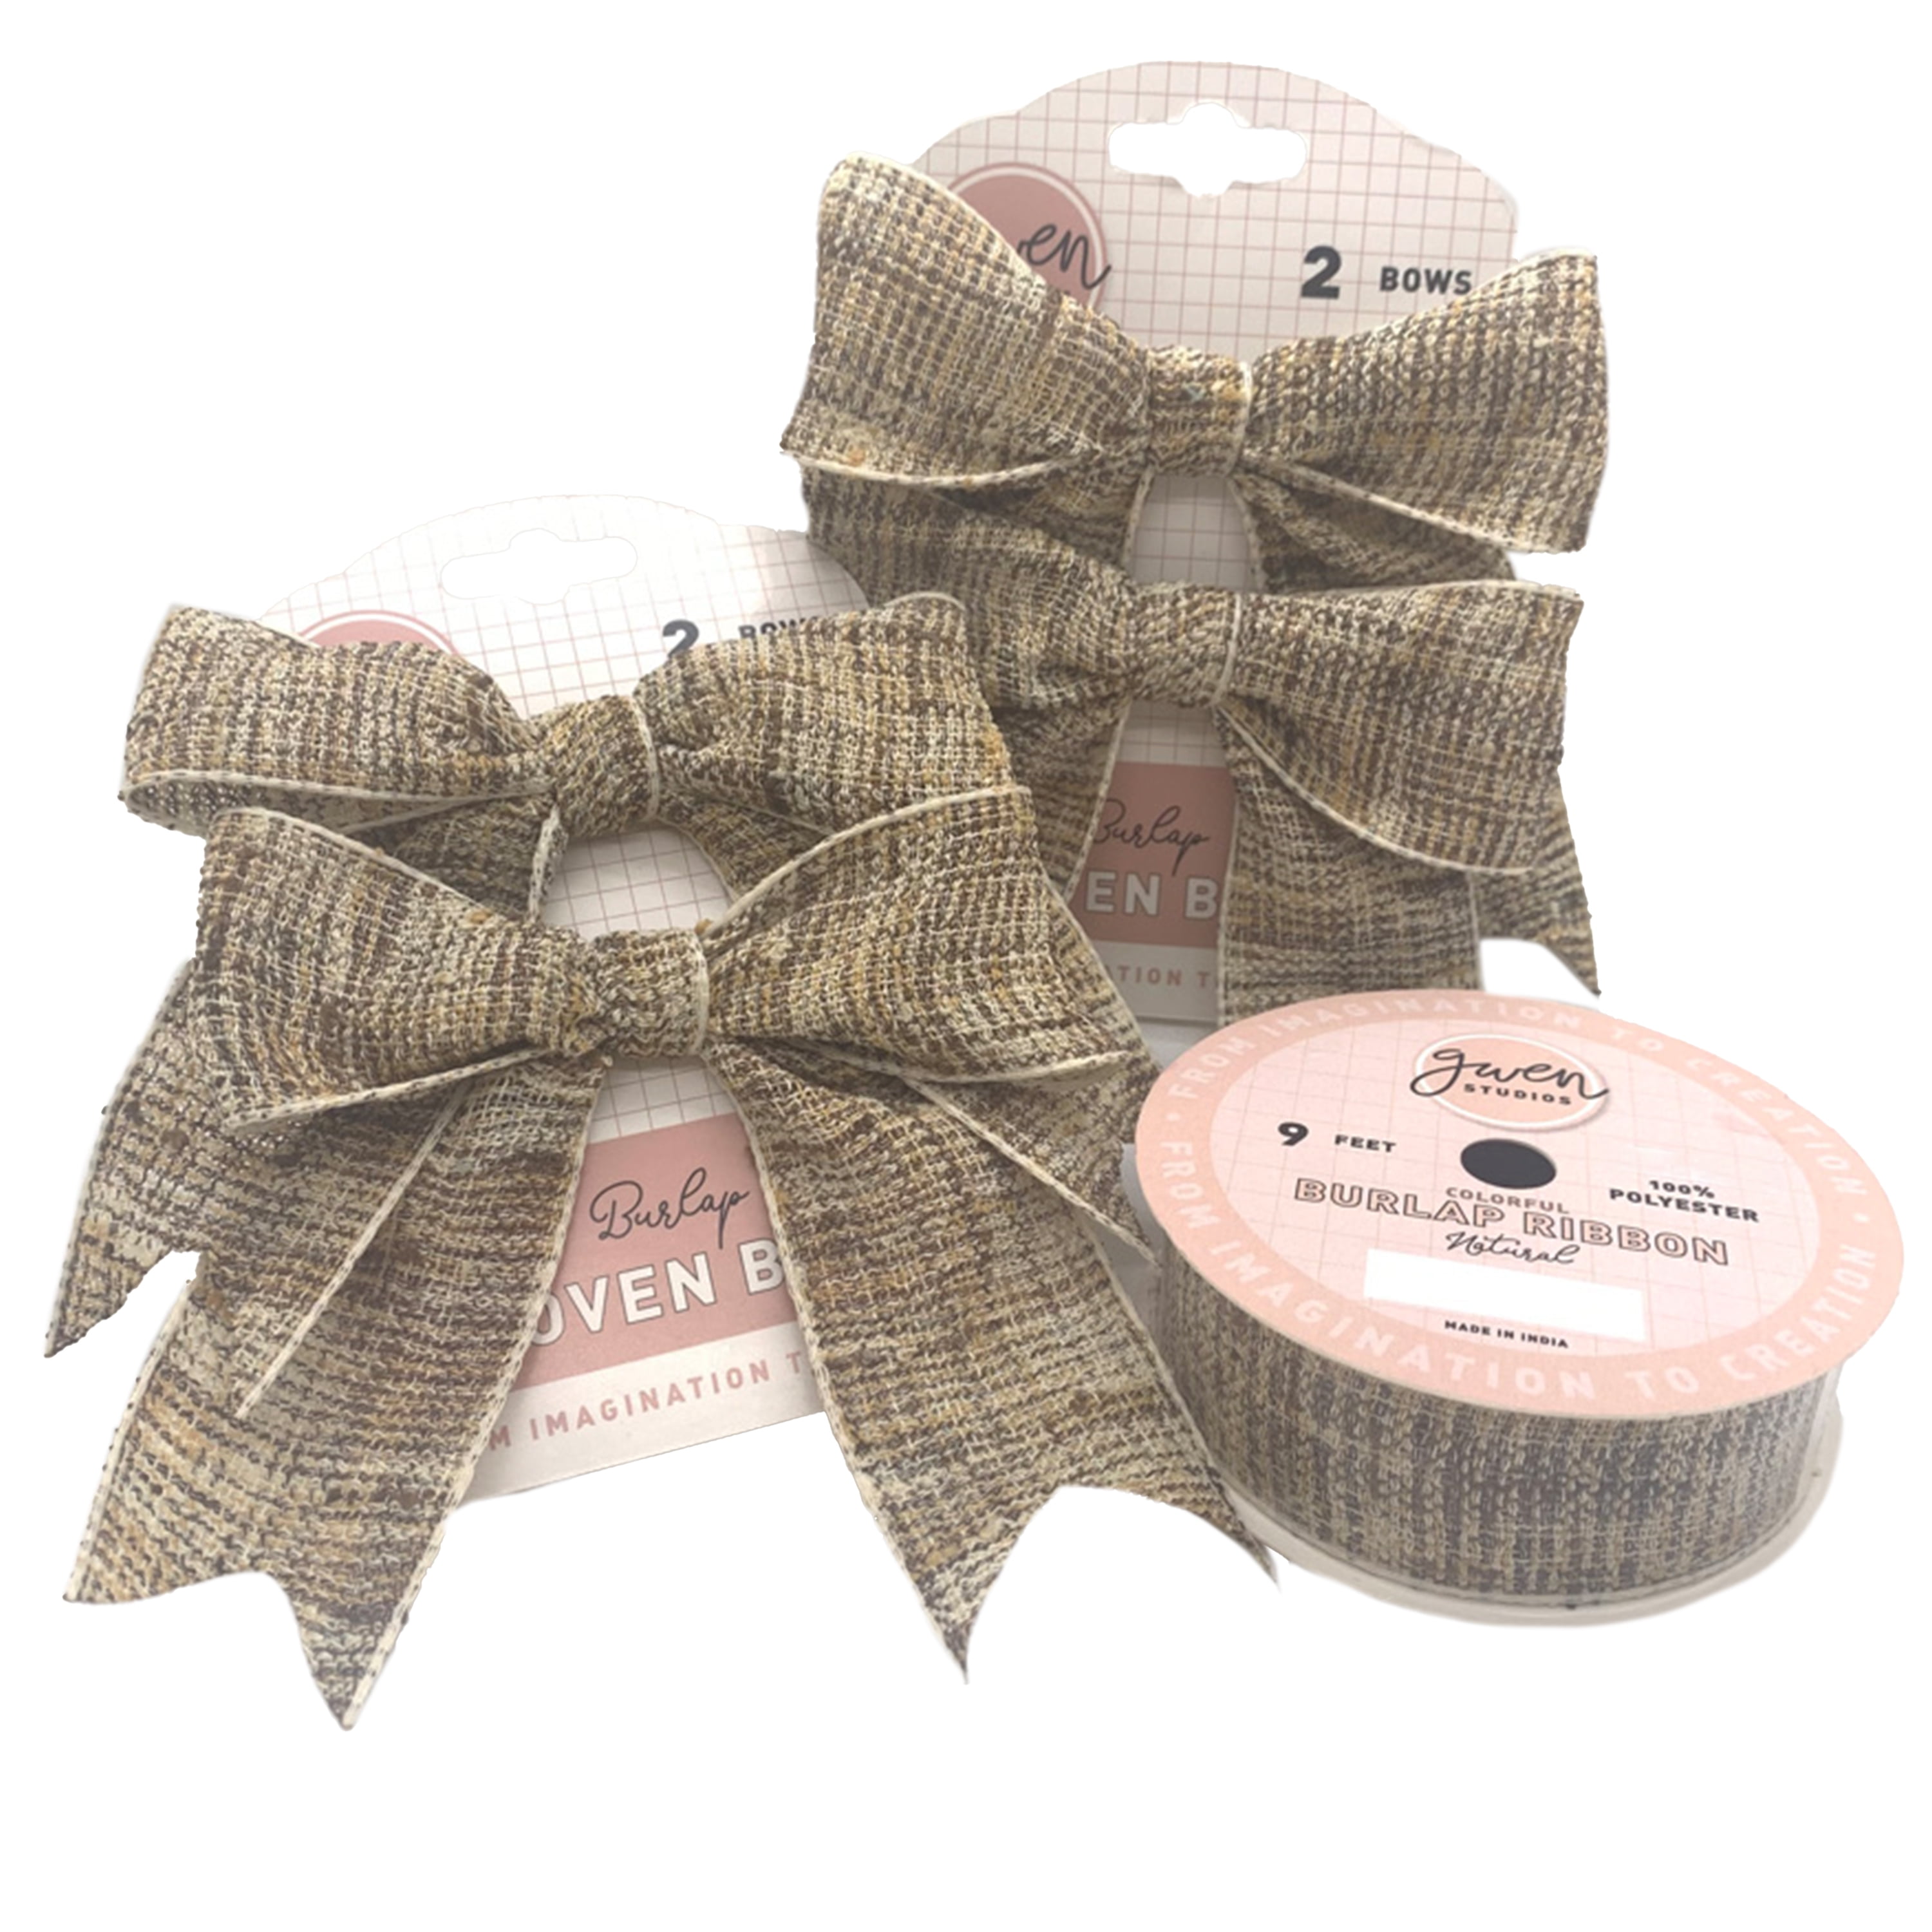 Gwen Studios Burlap Ribbon & Bows - 4 Bows 4 inch x 3 inch & 3 Yards of Ribbon, Natural Brown Plaid, Size: 4 inch x 3 inch Bows and 1 inch x 3 Yards